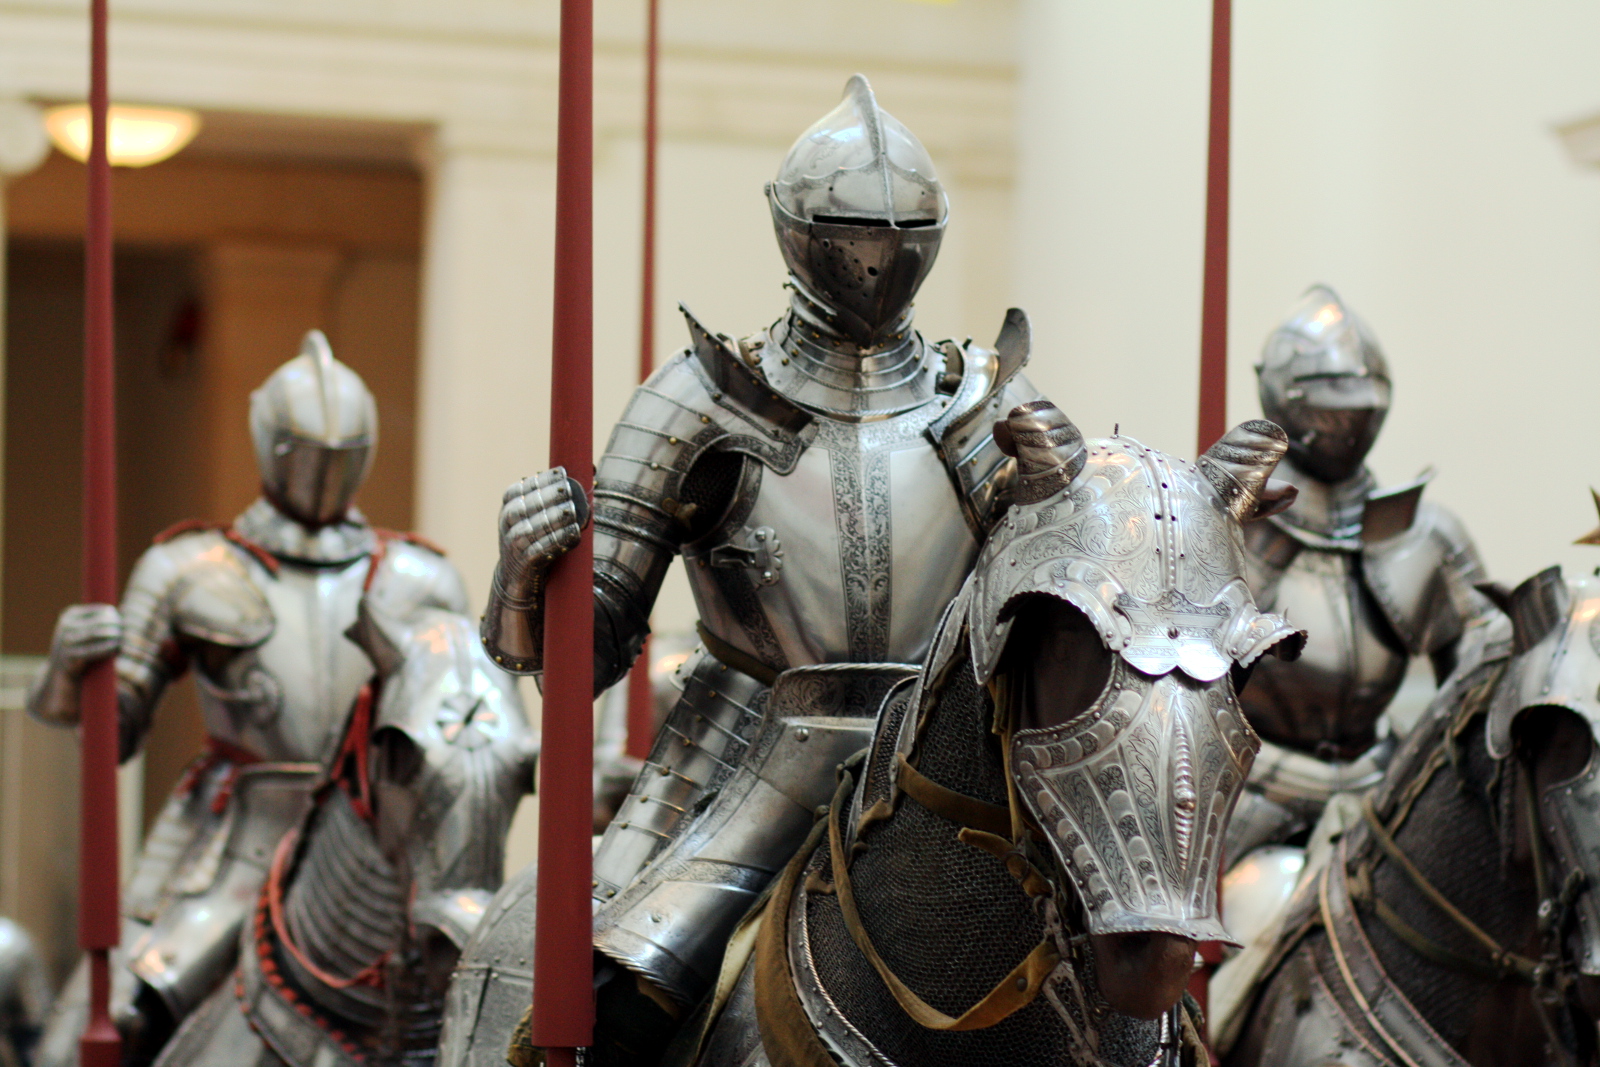 Tournaments of the Medieval Knights